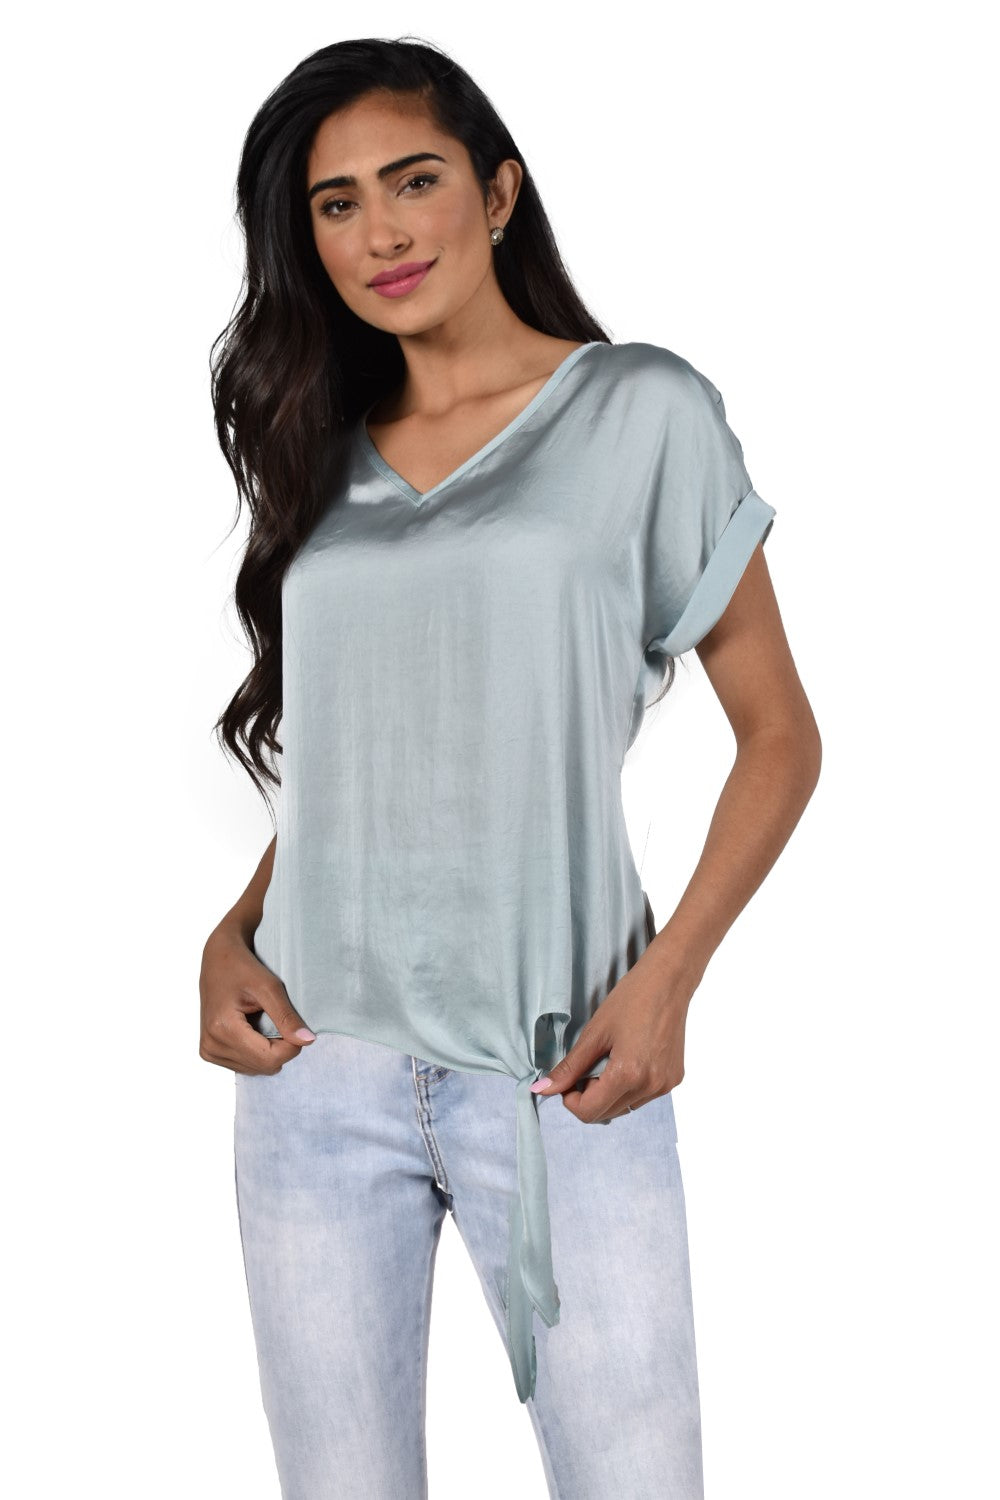 Frank Lyman Top Style 196636 Style: 196636 Available colors: Aquamist / Blue / Cashew / Khaki Fabric: 100% Polyester Satin Finish Woven Top Made In Canada Important: Backorder items are usually available for shipment within 48-72 hours. FL-196636-AQU-2 designed by Frank Lyman